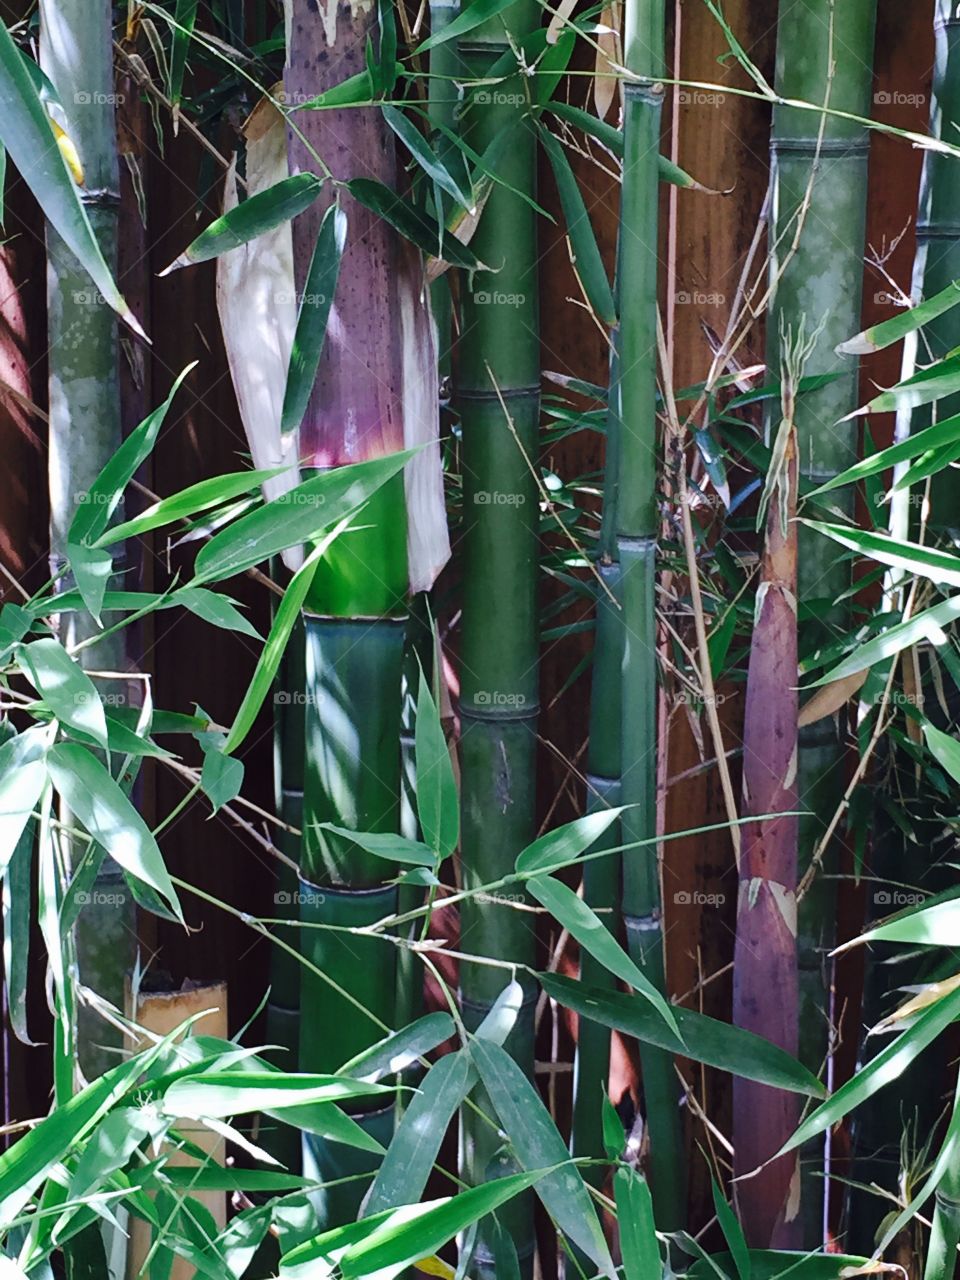 New bamboo. Spring bamboo growth!